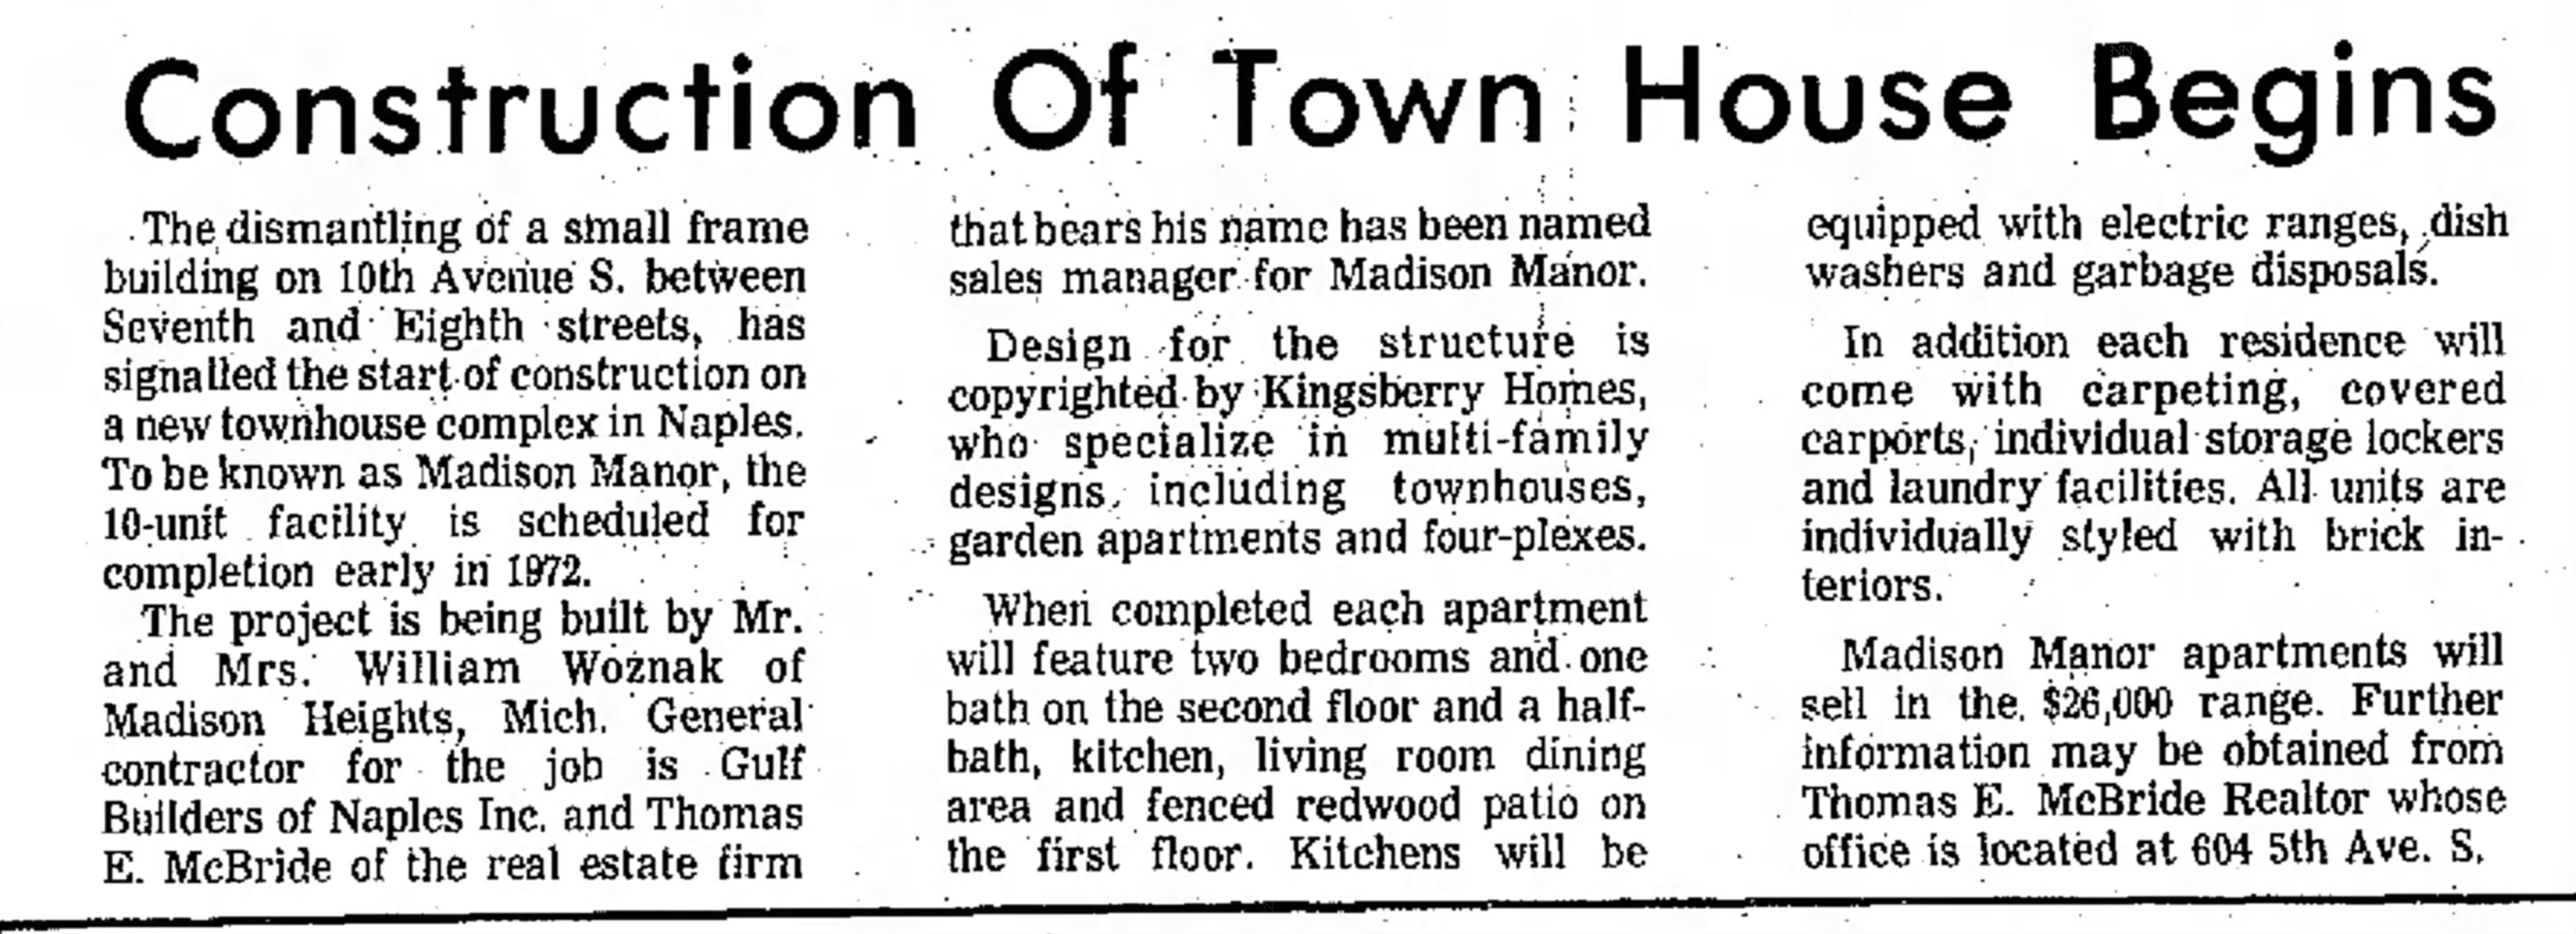 'Construction of Town House Begins,' Naples Daily News, September 9, 1971